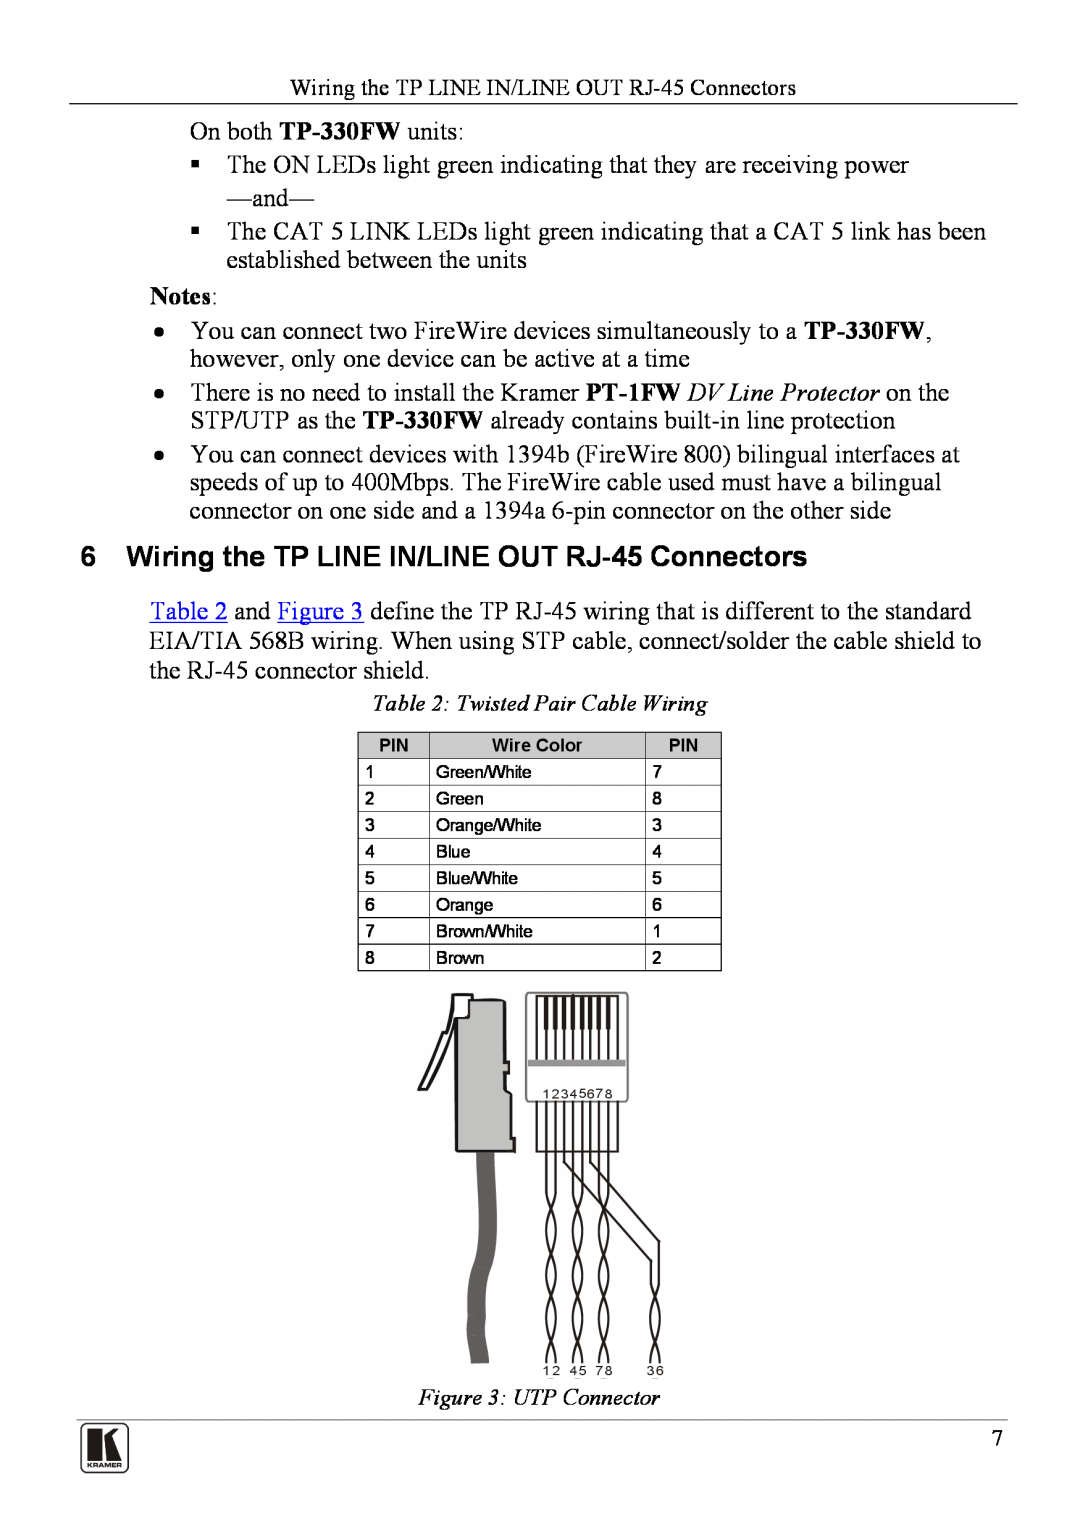 Kramer Electronics TP-330FW user manual Wiring the TP LINE IN/LINE OUT RJ-45Connectors 